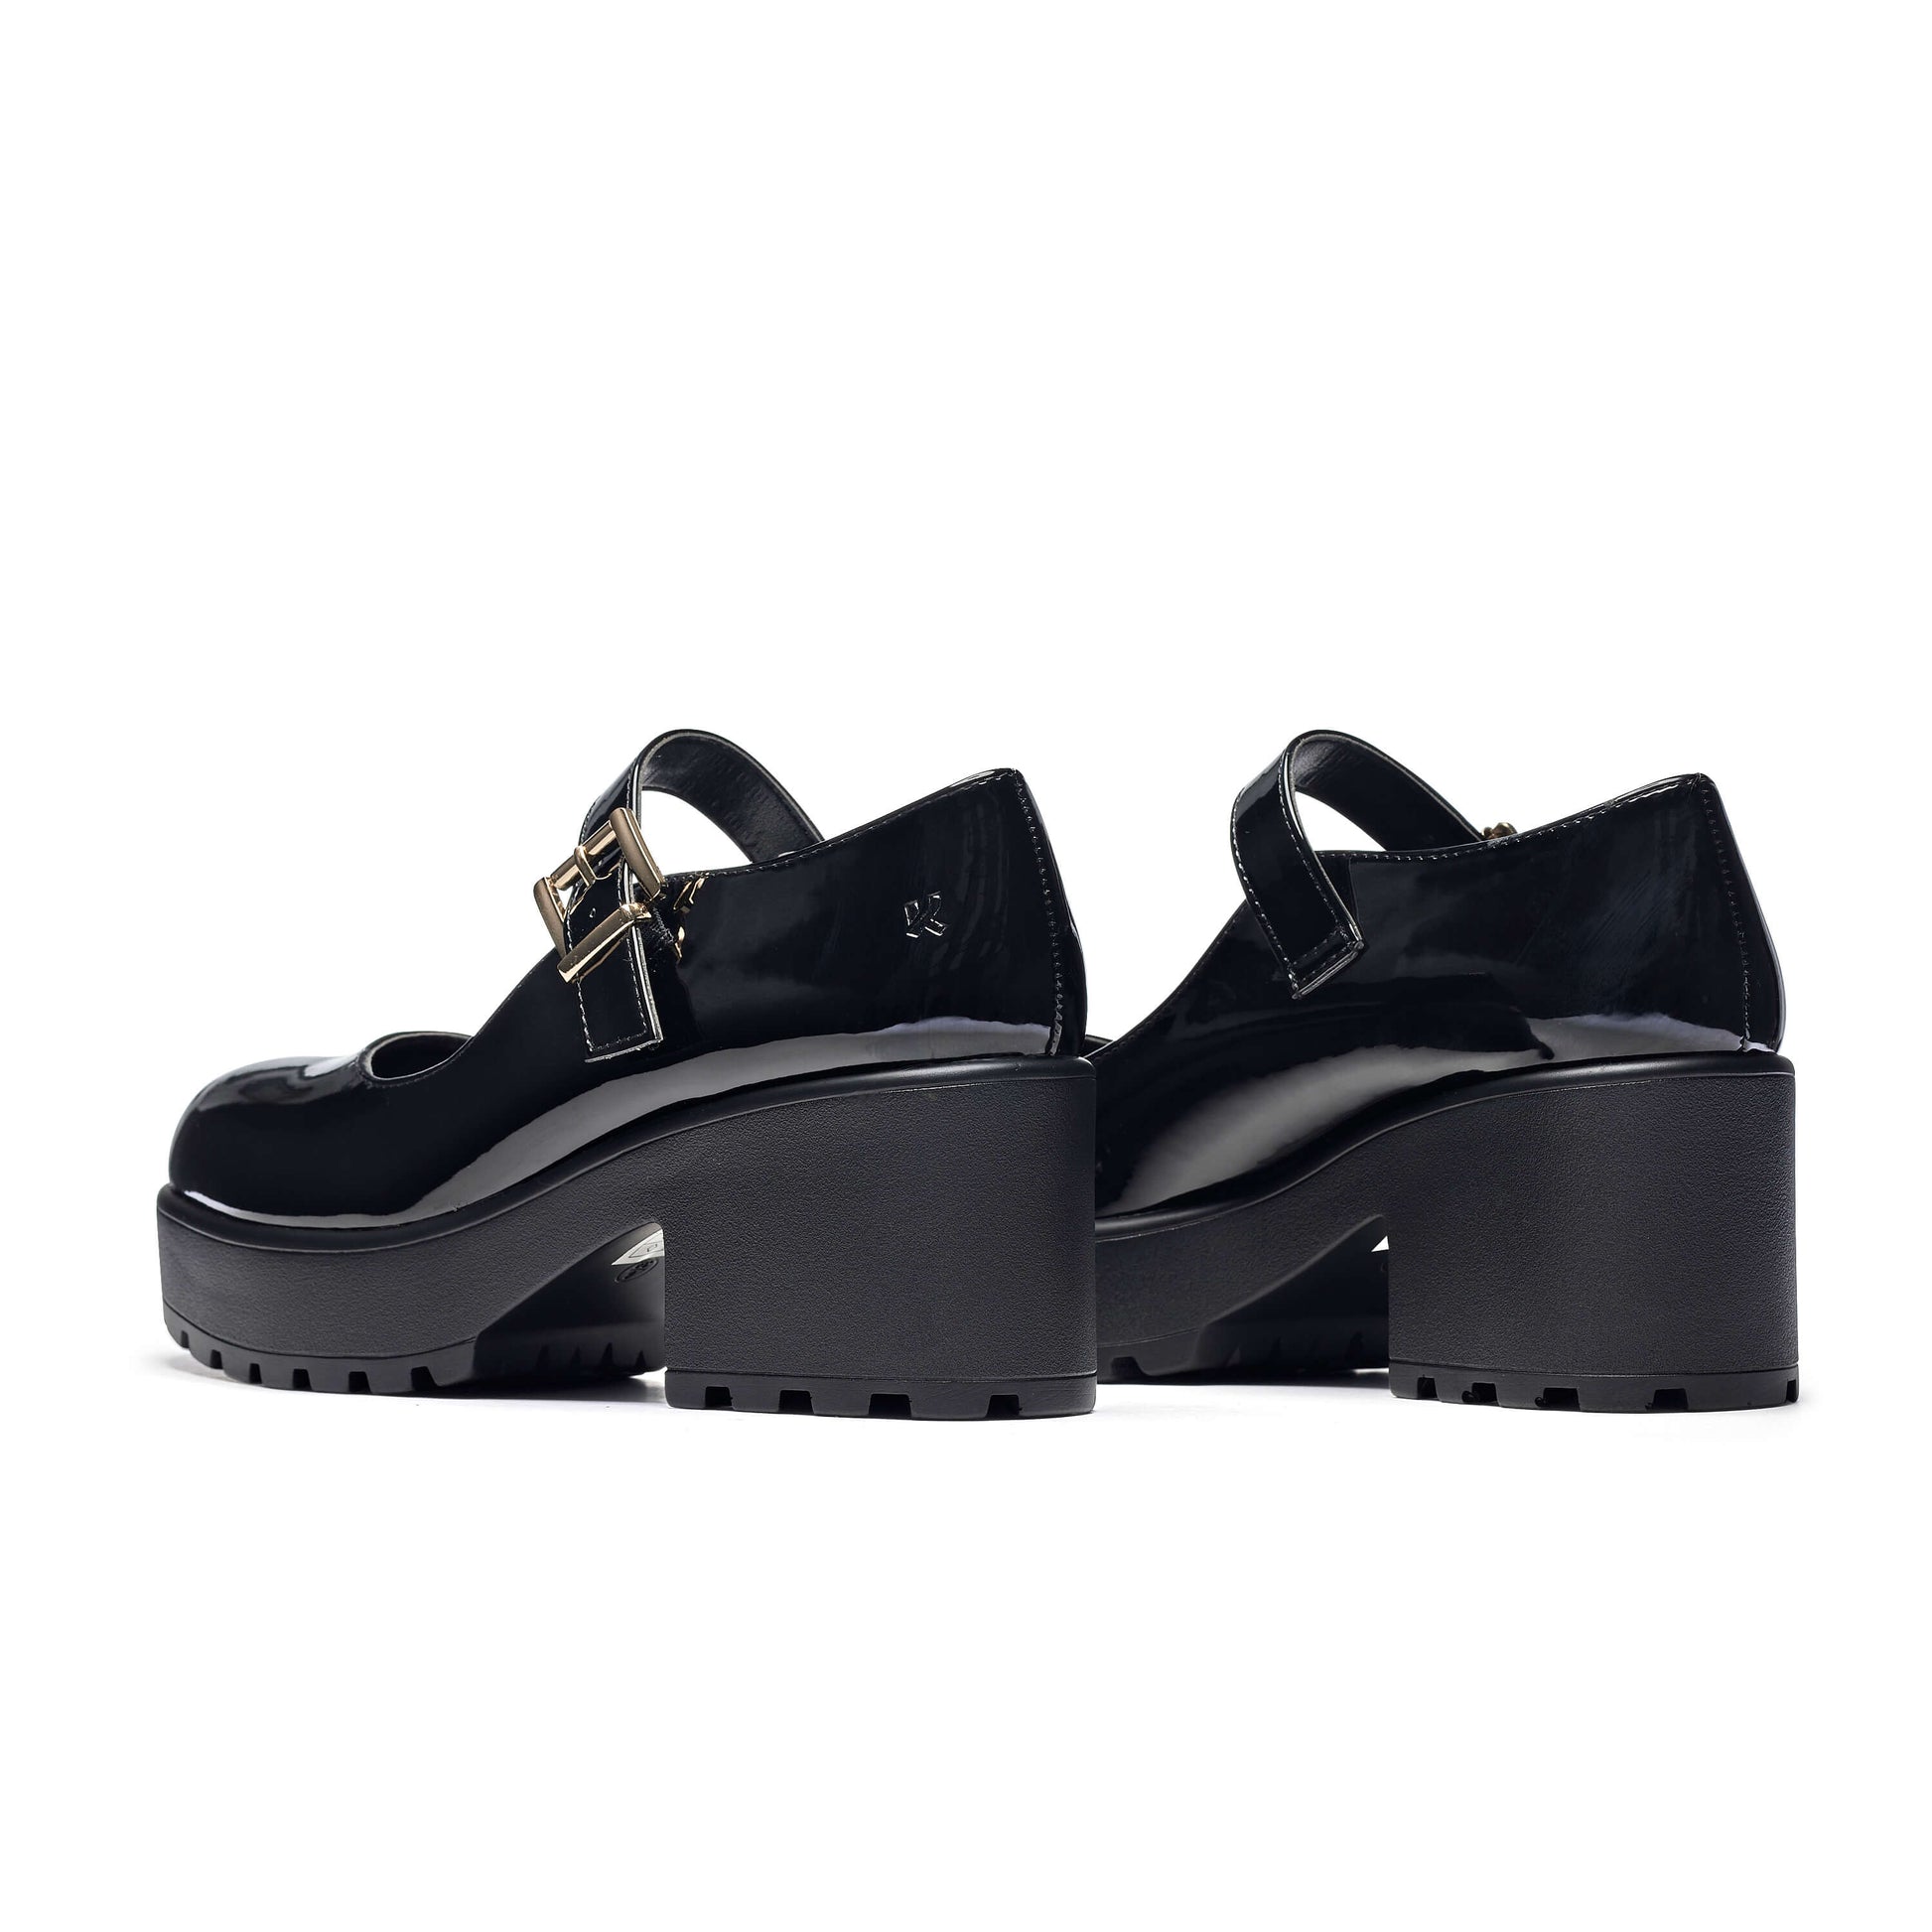 TIRA Black Mary Jane Shoes 'Patent Edition' - Mary Janes - KOI Footwear - Black Patent - Back View